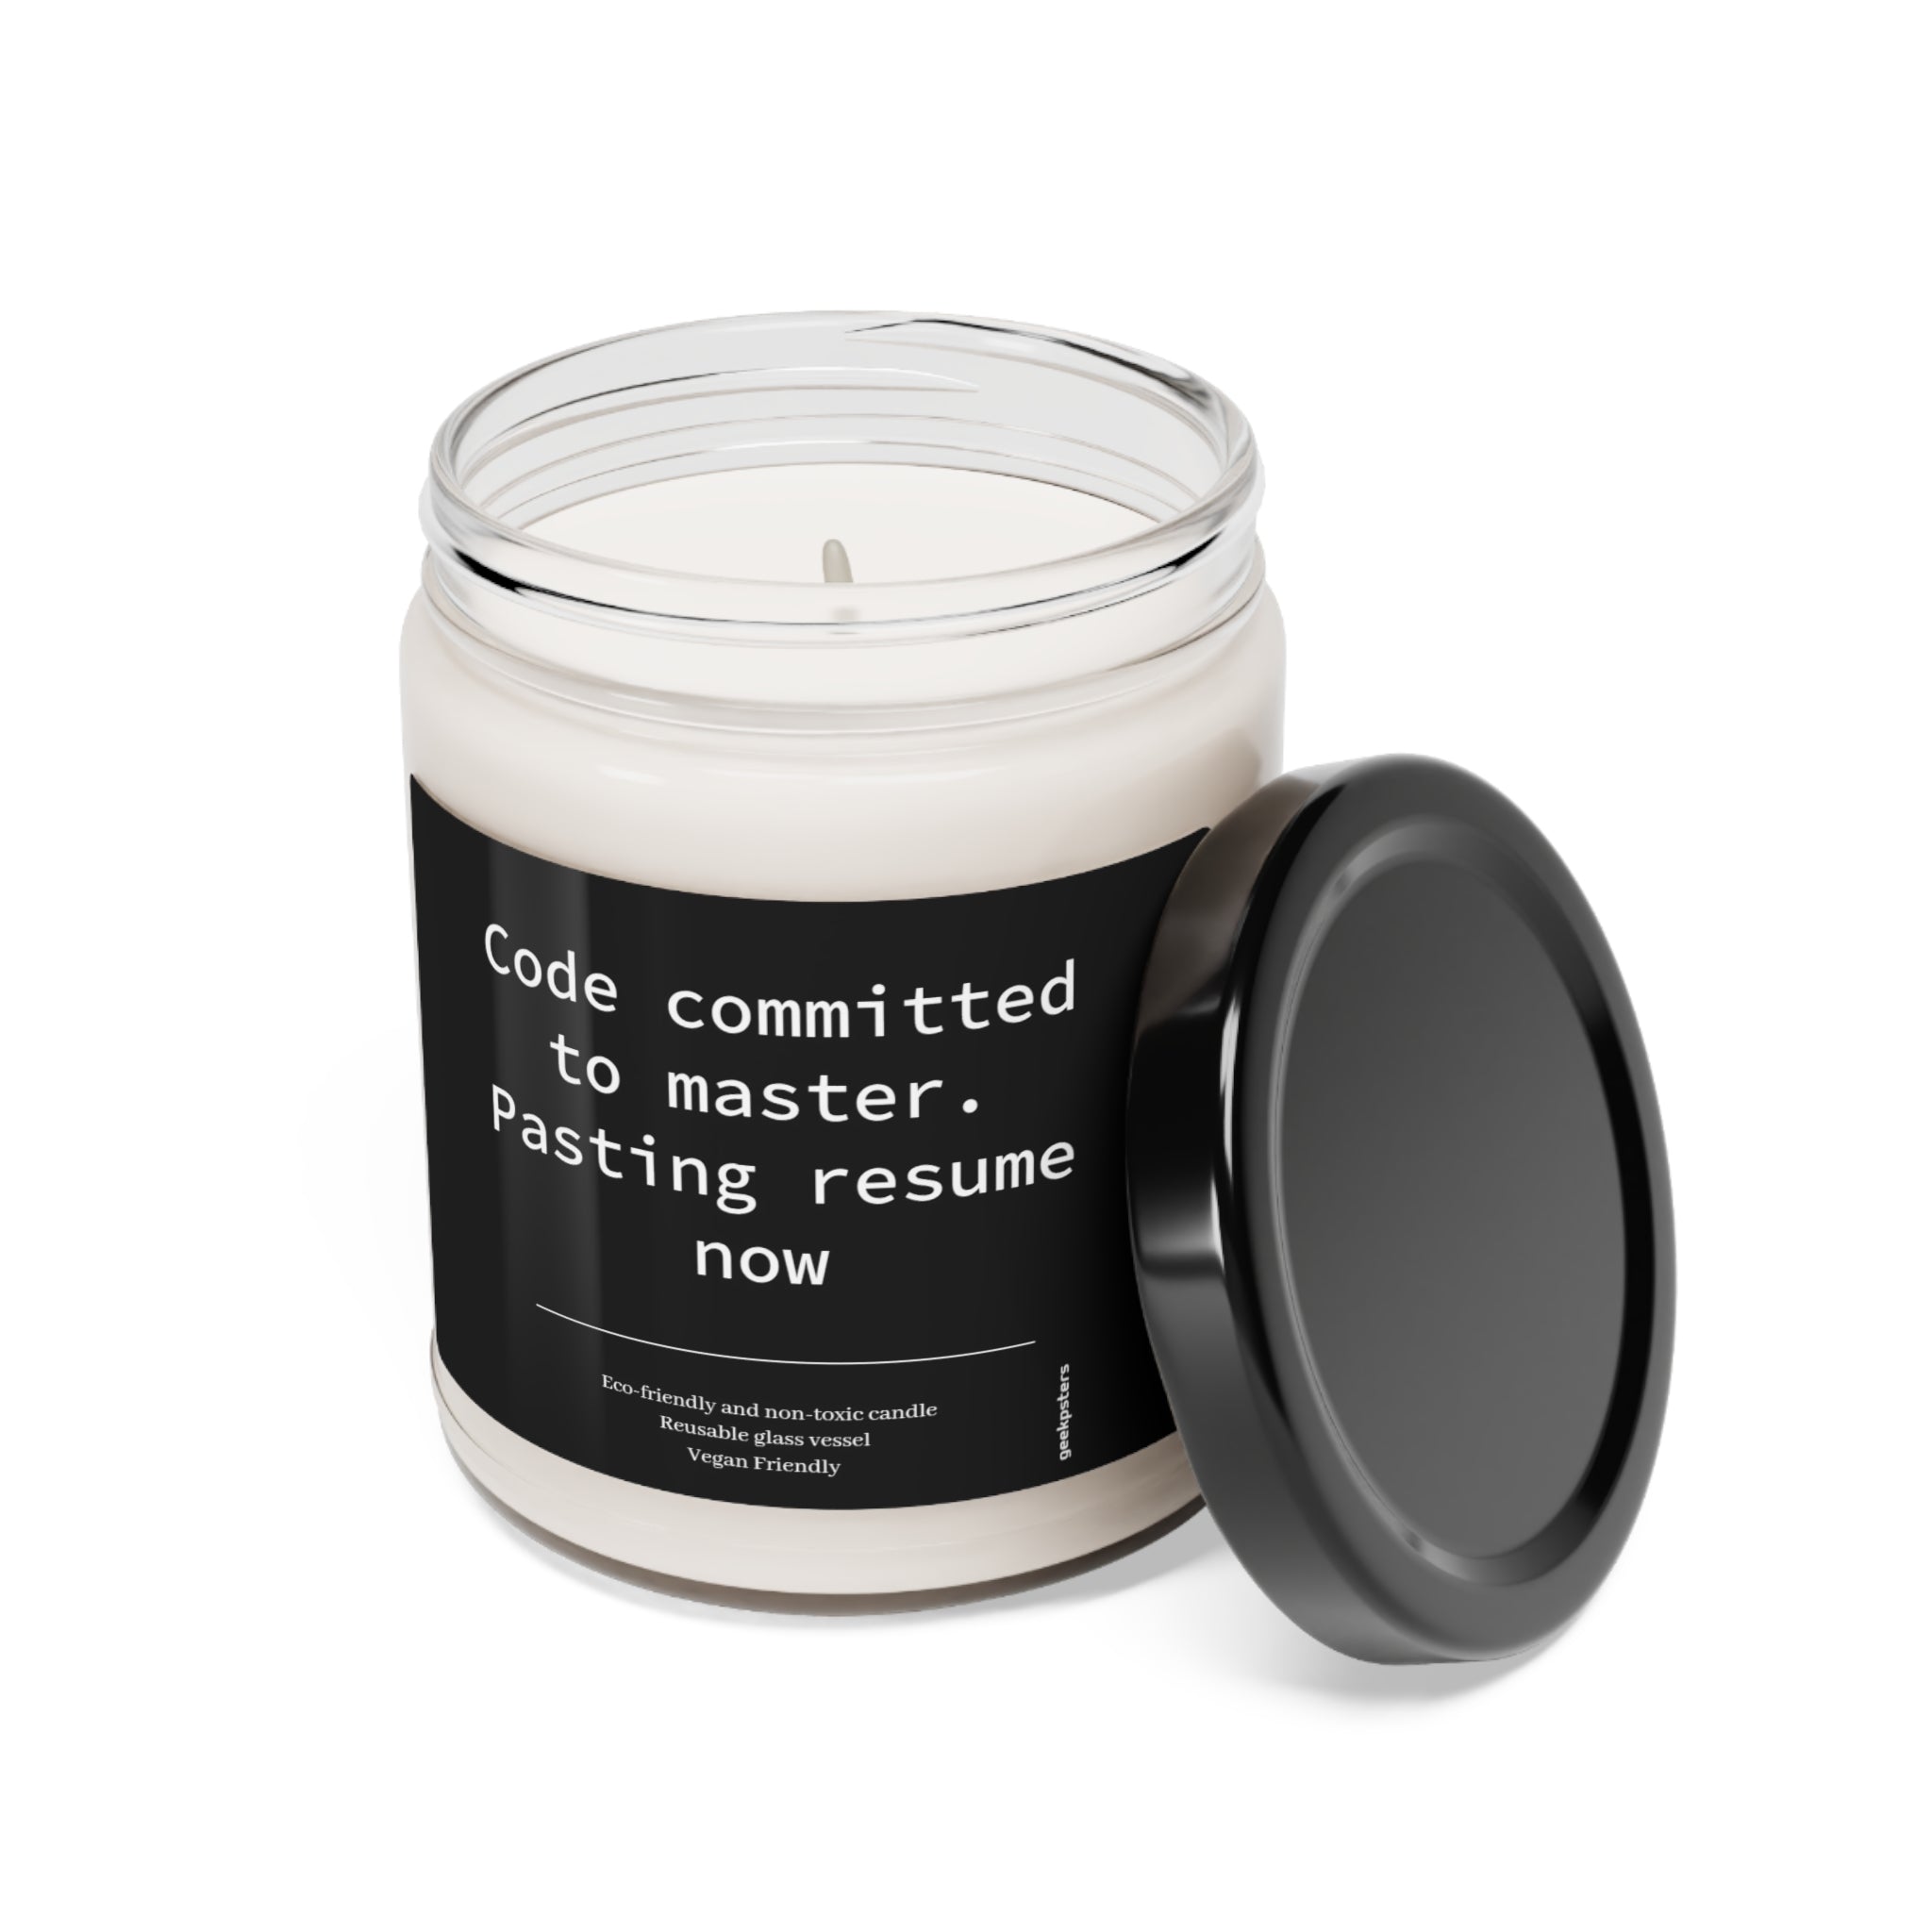 A Code Committed to Master. Pasting Resume Now scented soy candle in a glass jar with a humorous label that reads "code committed to master. pasting resume now" suggesting a developer joking about the consequences of pushing code directly to the master branch